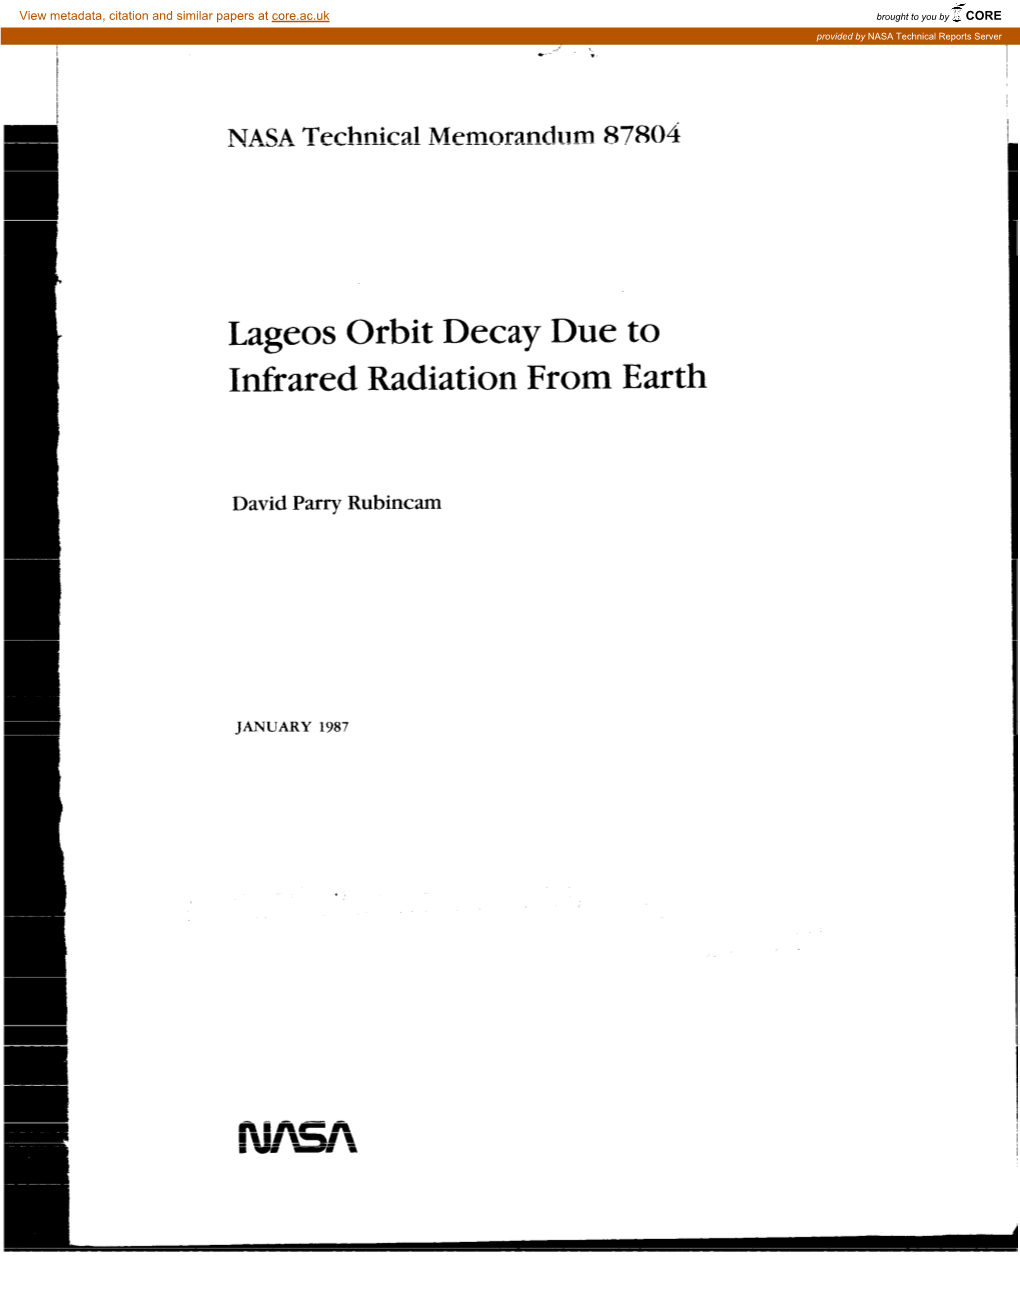 Lageos Orbit Decay Due to Infrared Radiation from Earth